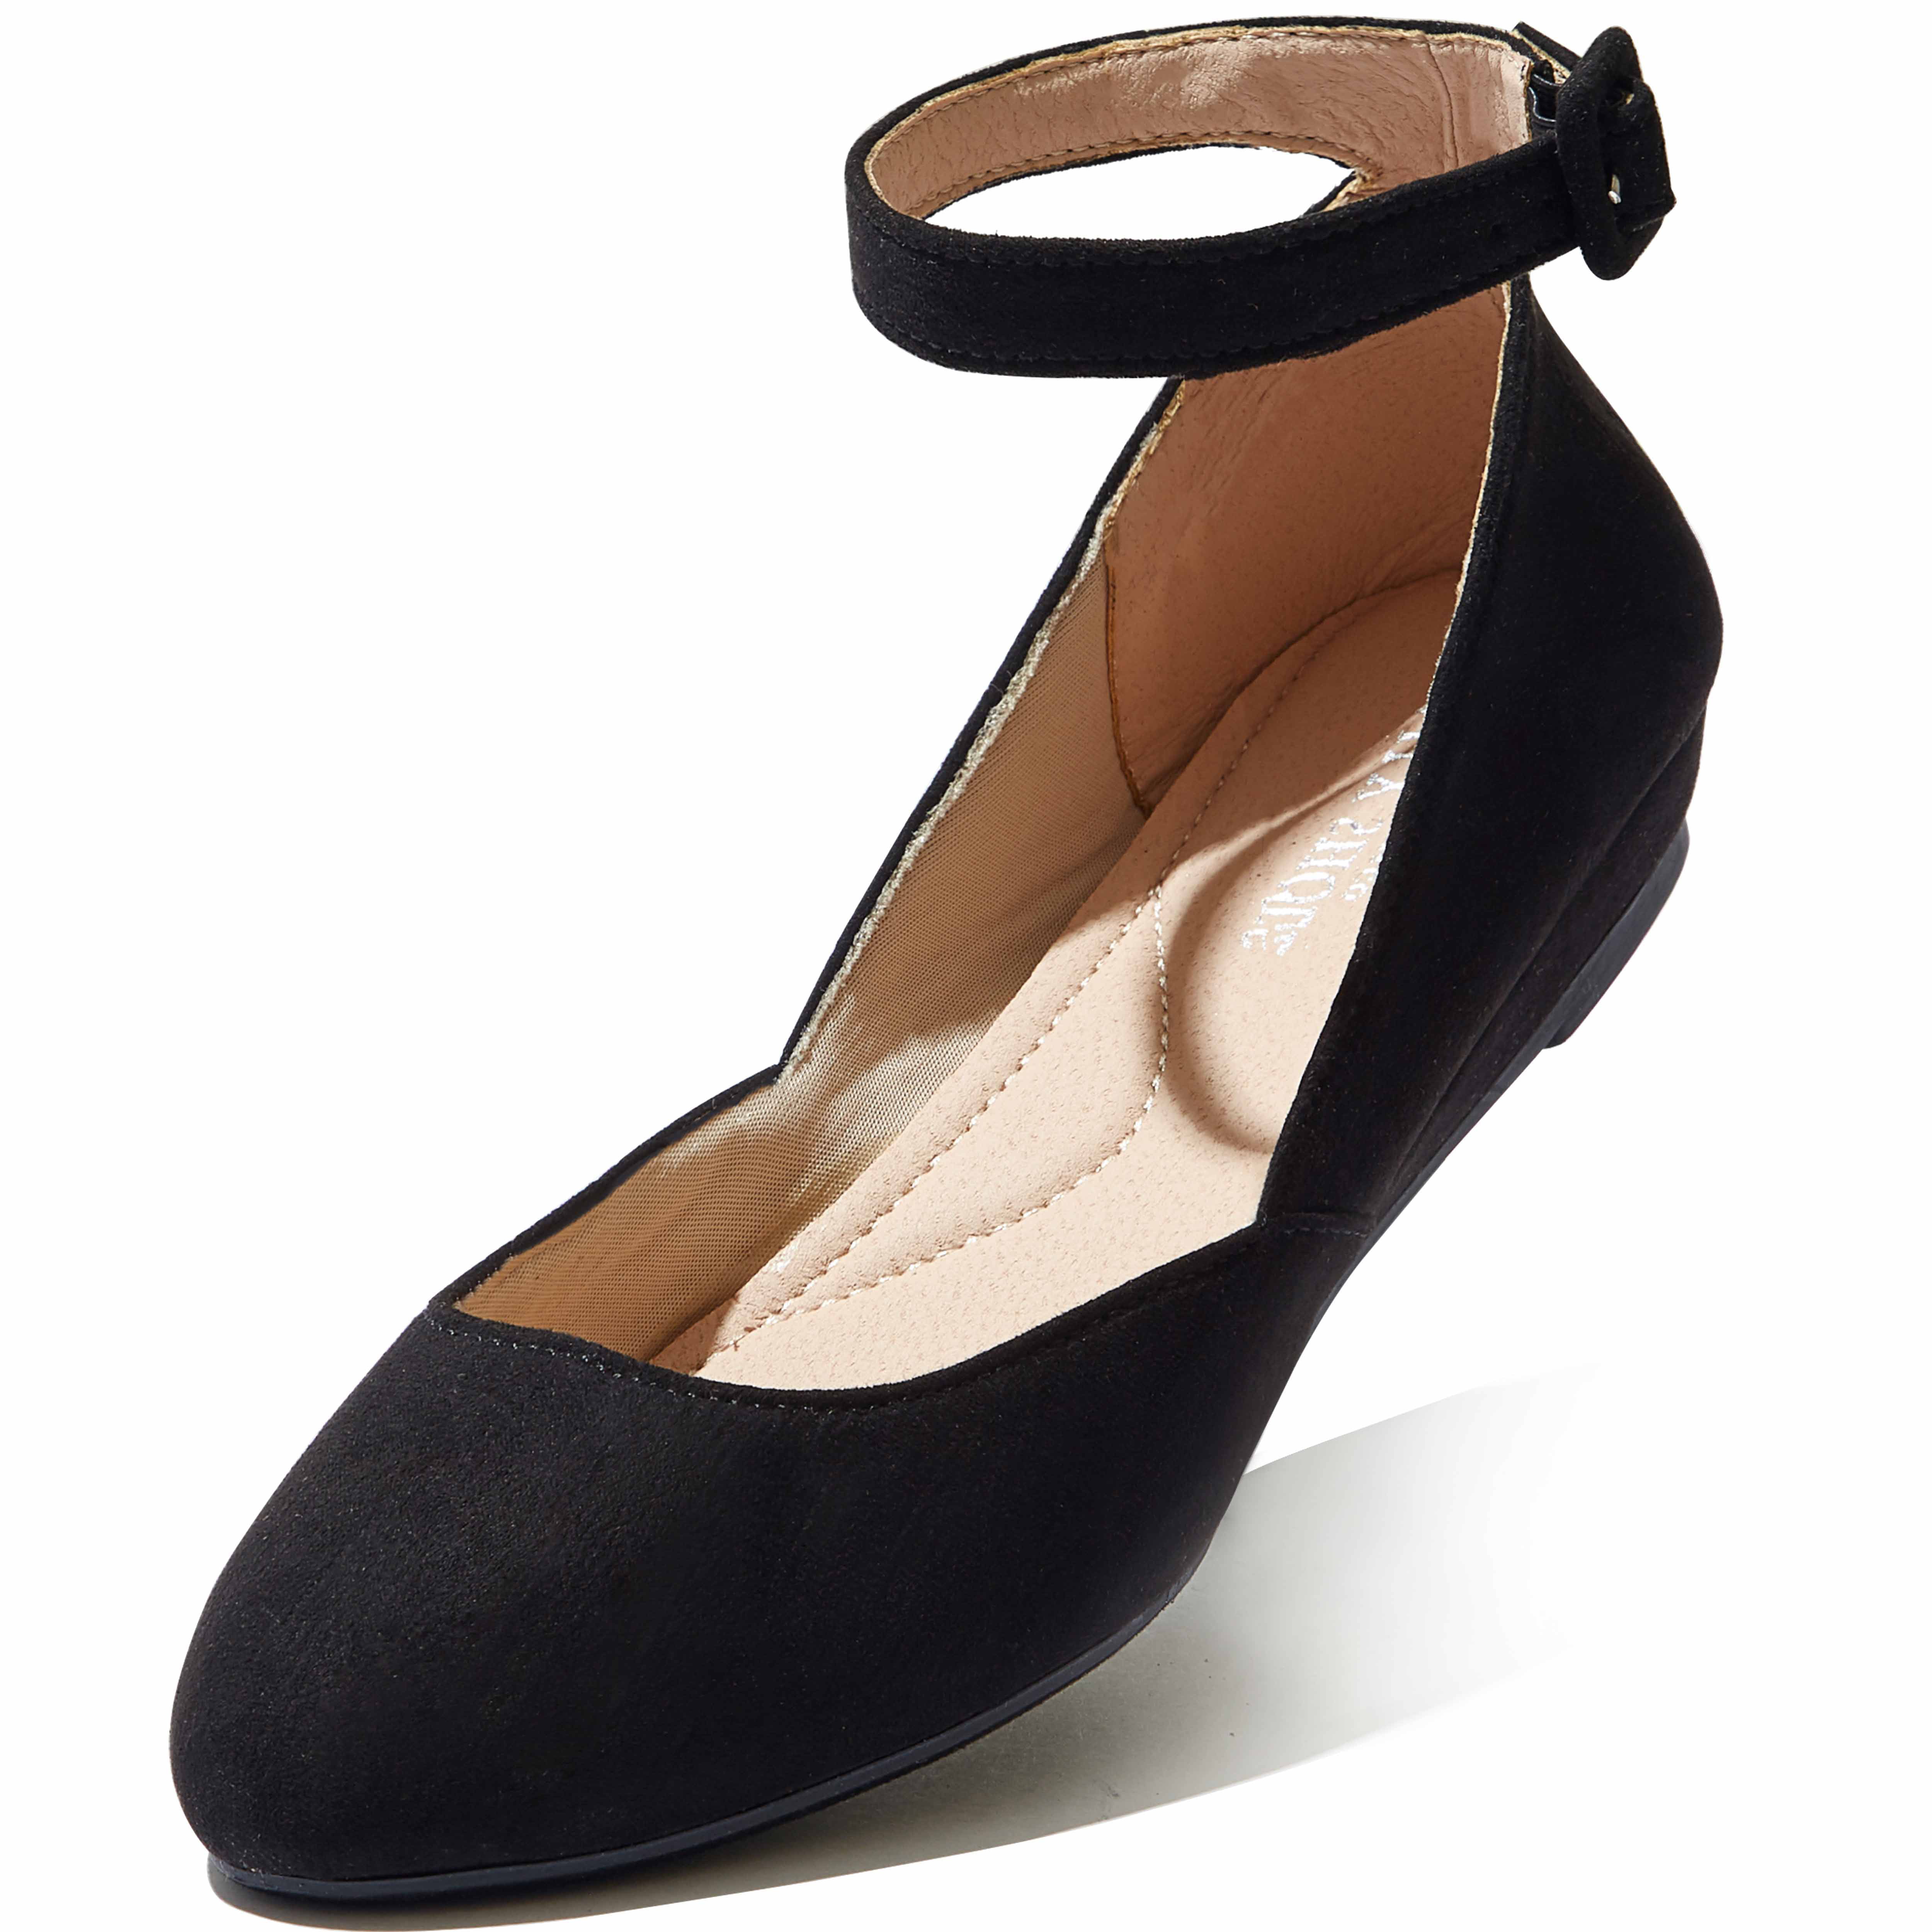 Flats Casual Dressy Shoes Hillsdale-01 